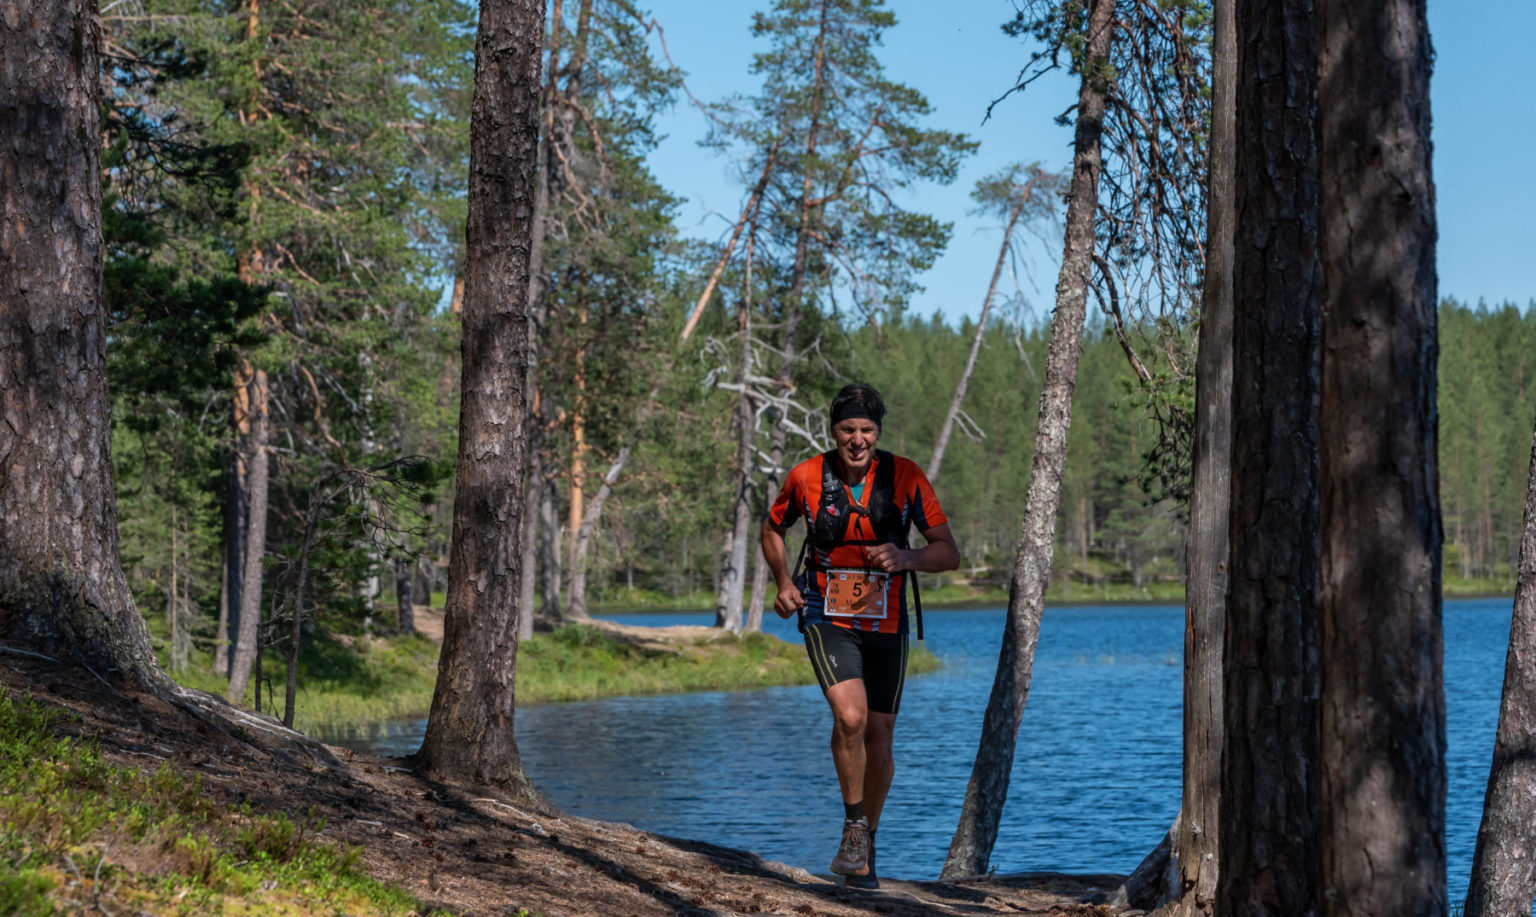 A man runs along a forested trail by a lake.